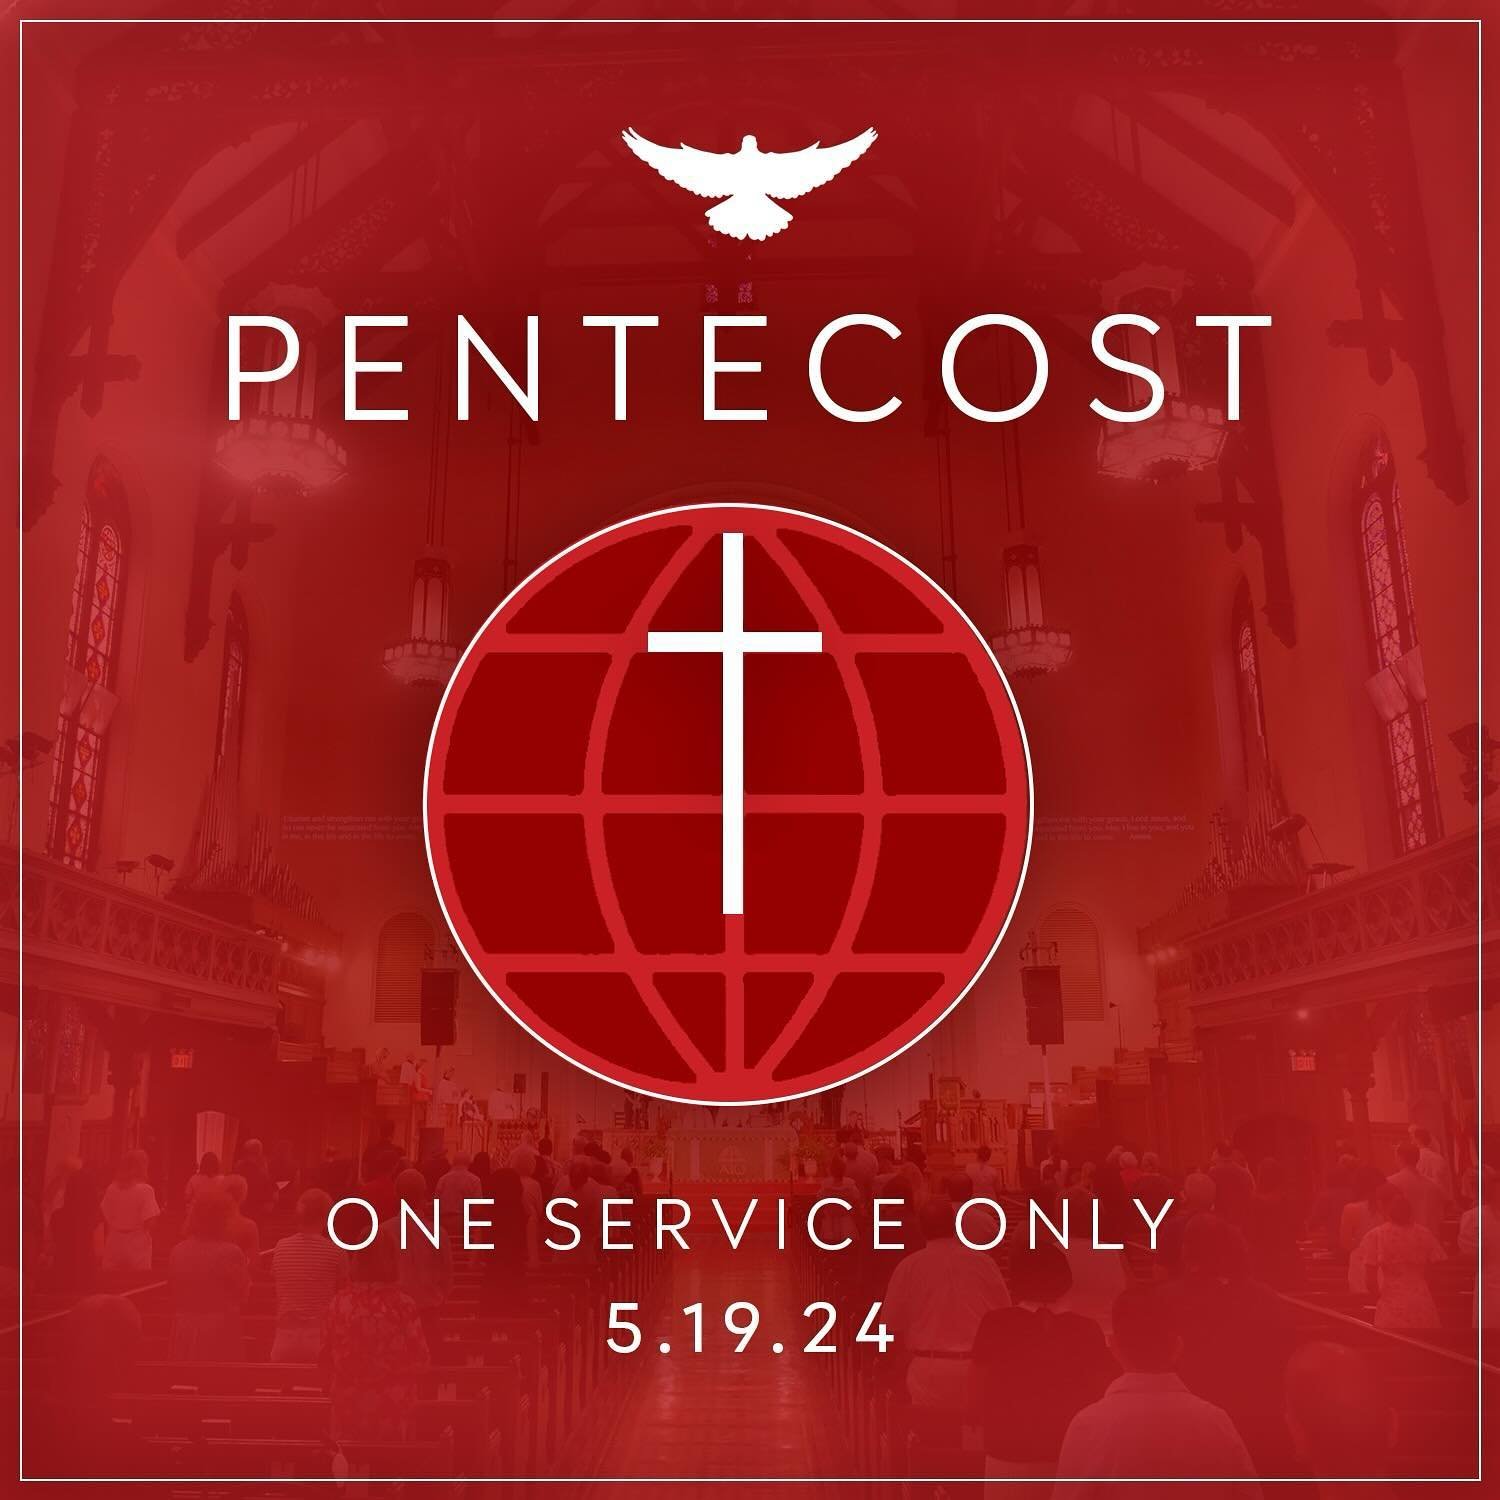 On Sunday May 19, please join us for a special 11am service at St. George&rsquo;s celebrating Pentecost and the tremendous progress of our ongoing capital campaign.  Following the service, we invite you into the Chapel for our global food festival.  